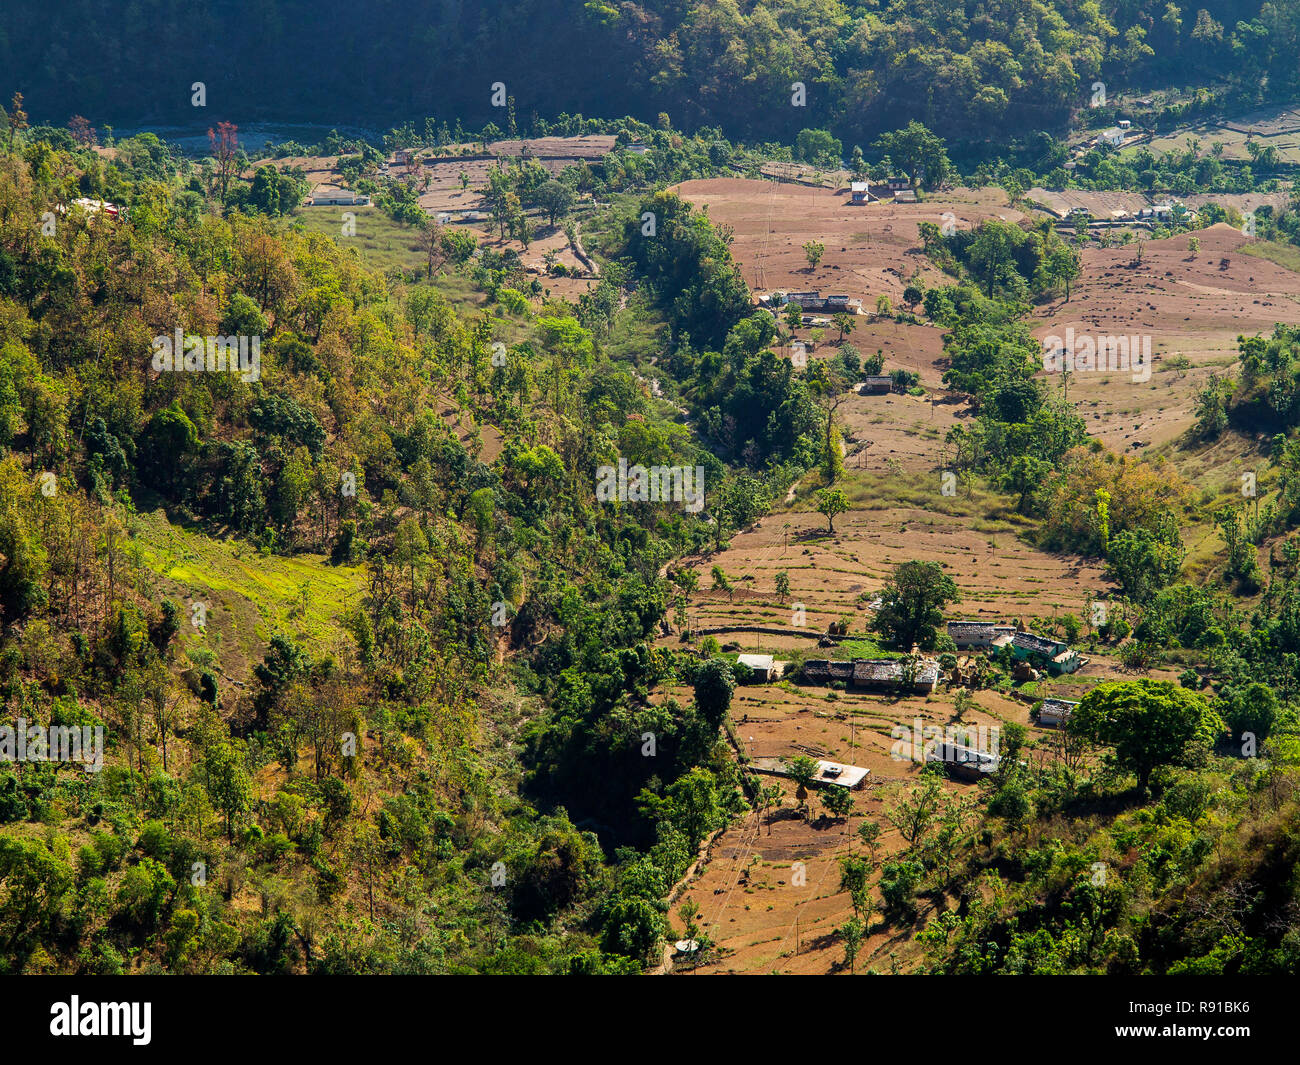 Kundal village on the Nandhour Valley, Kumaon Hills, where Jim Corbett come after the Chowgarh maneating tigress, Uttarakhand, India Stock Photo